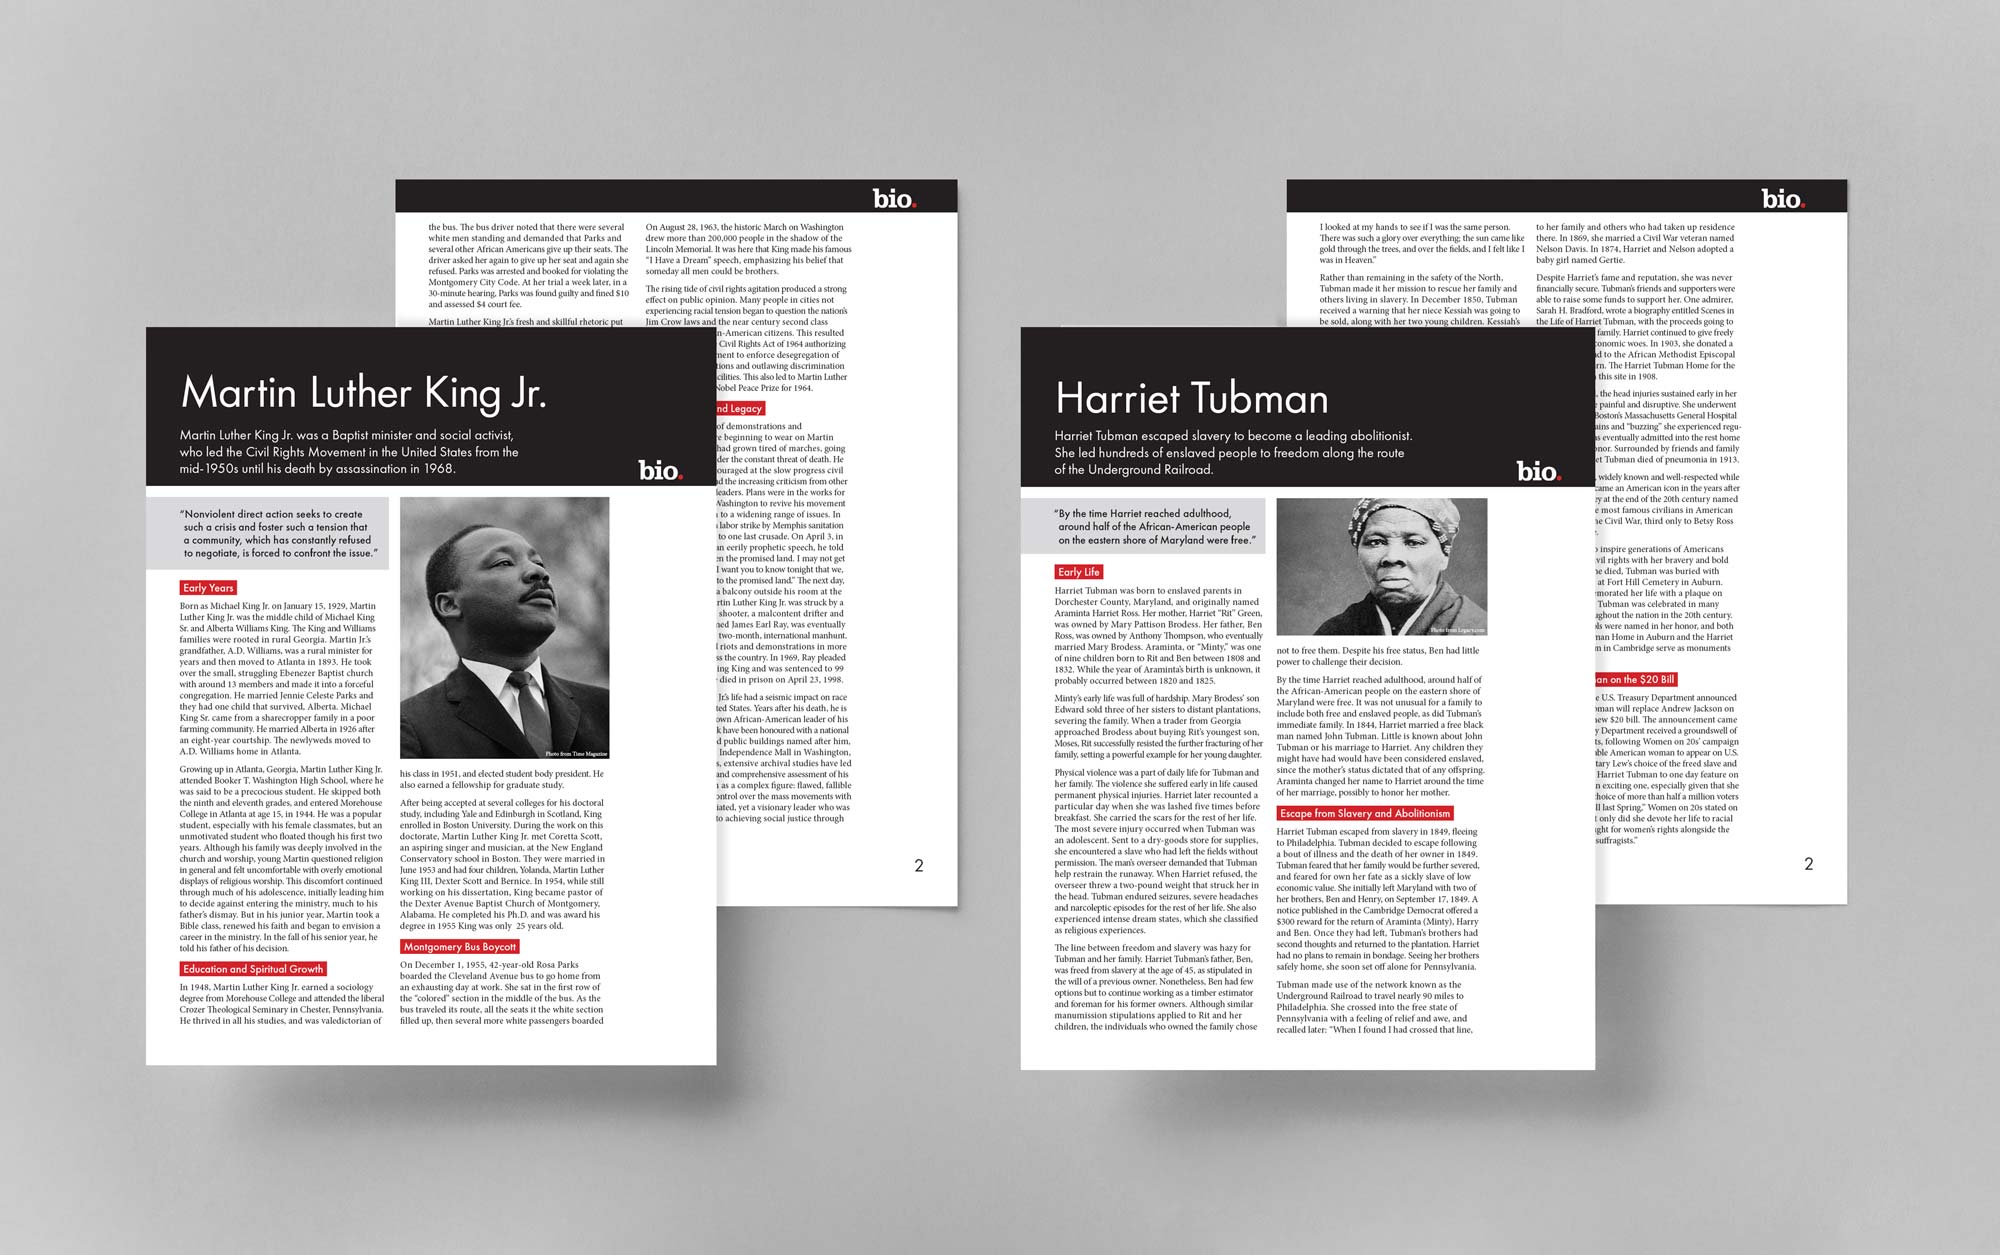 This is an image of 2 bio fact sheets. The image shows the front and back of the fact sheets. The fact sheets talk about Martin Luther King Jr. and Harriet Tubman.